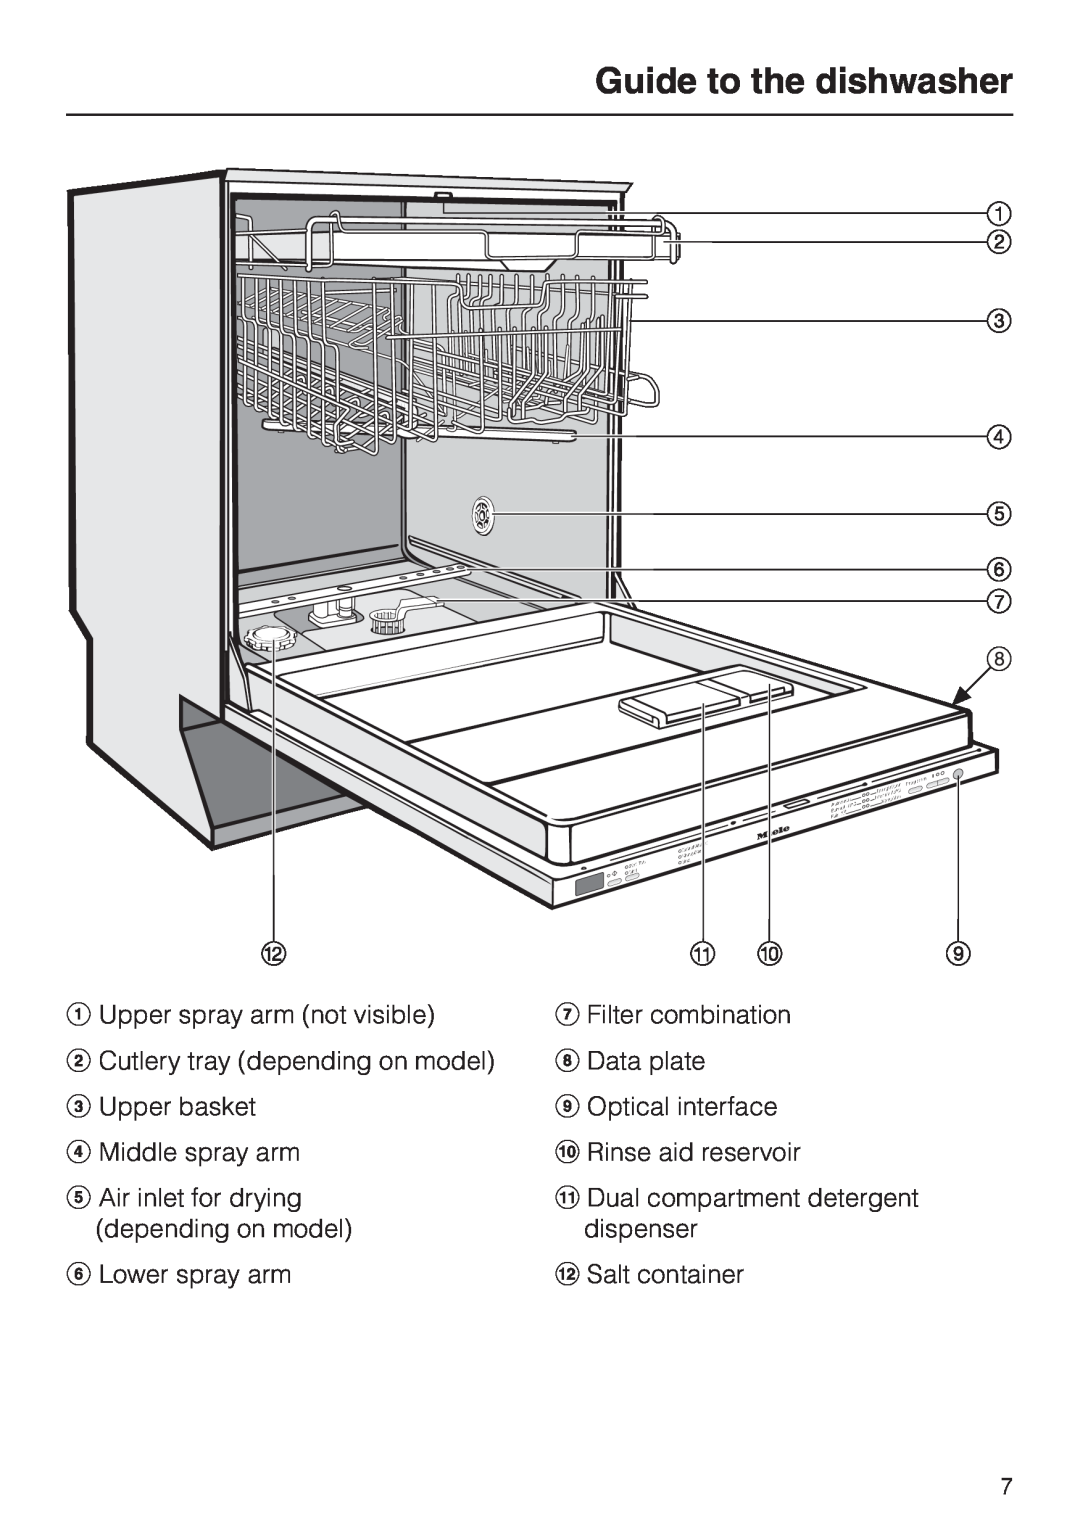 Miele G1470, G2470 operating instructions Guide to the dishwasher 